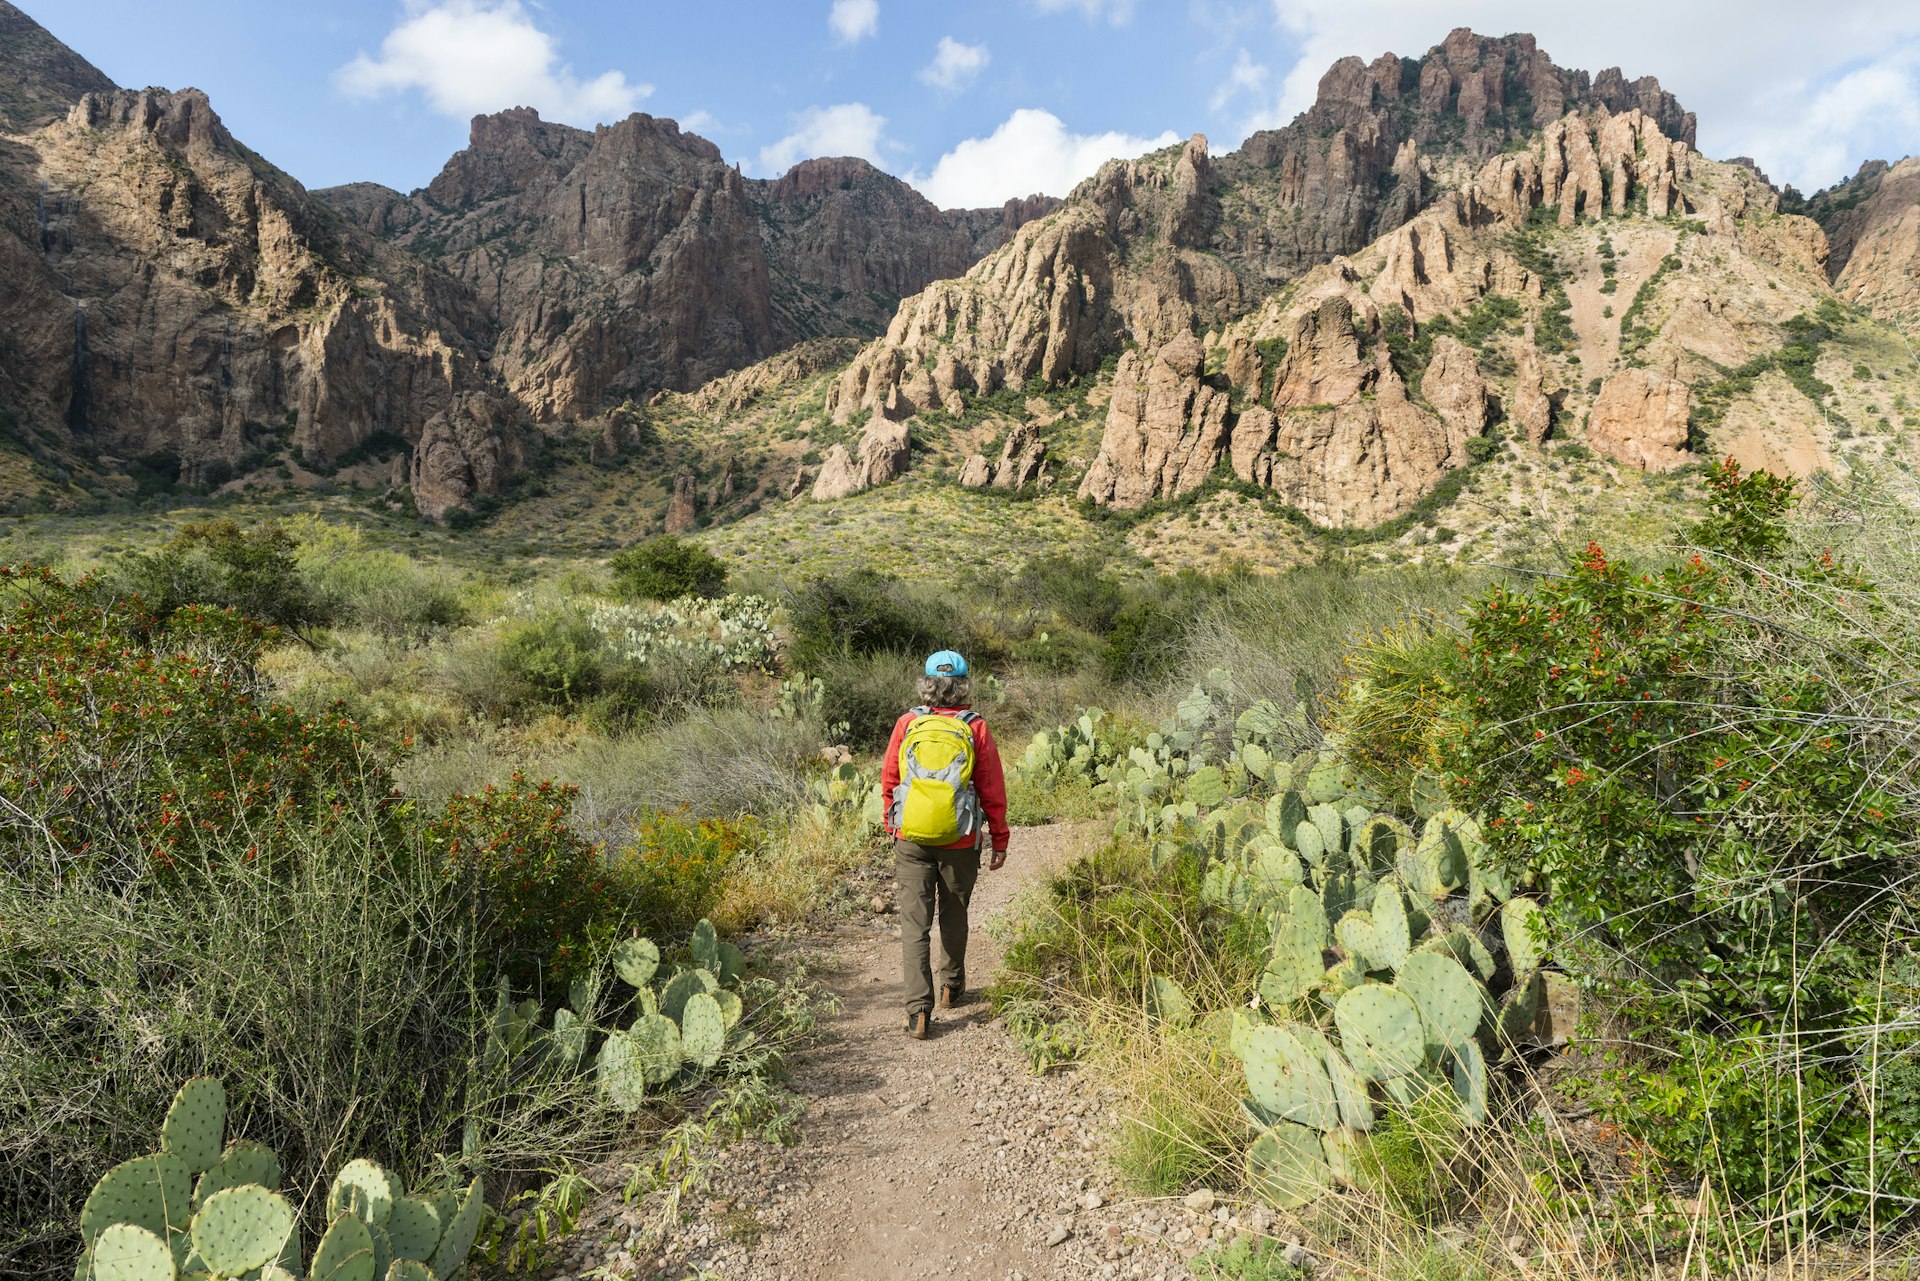 Senior woman walking on trail trough cactus, yucca plant and rocks in Big Bend National Park, Texas, USA